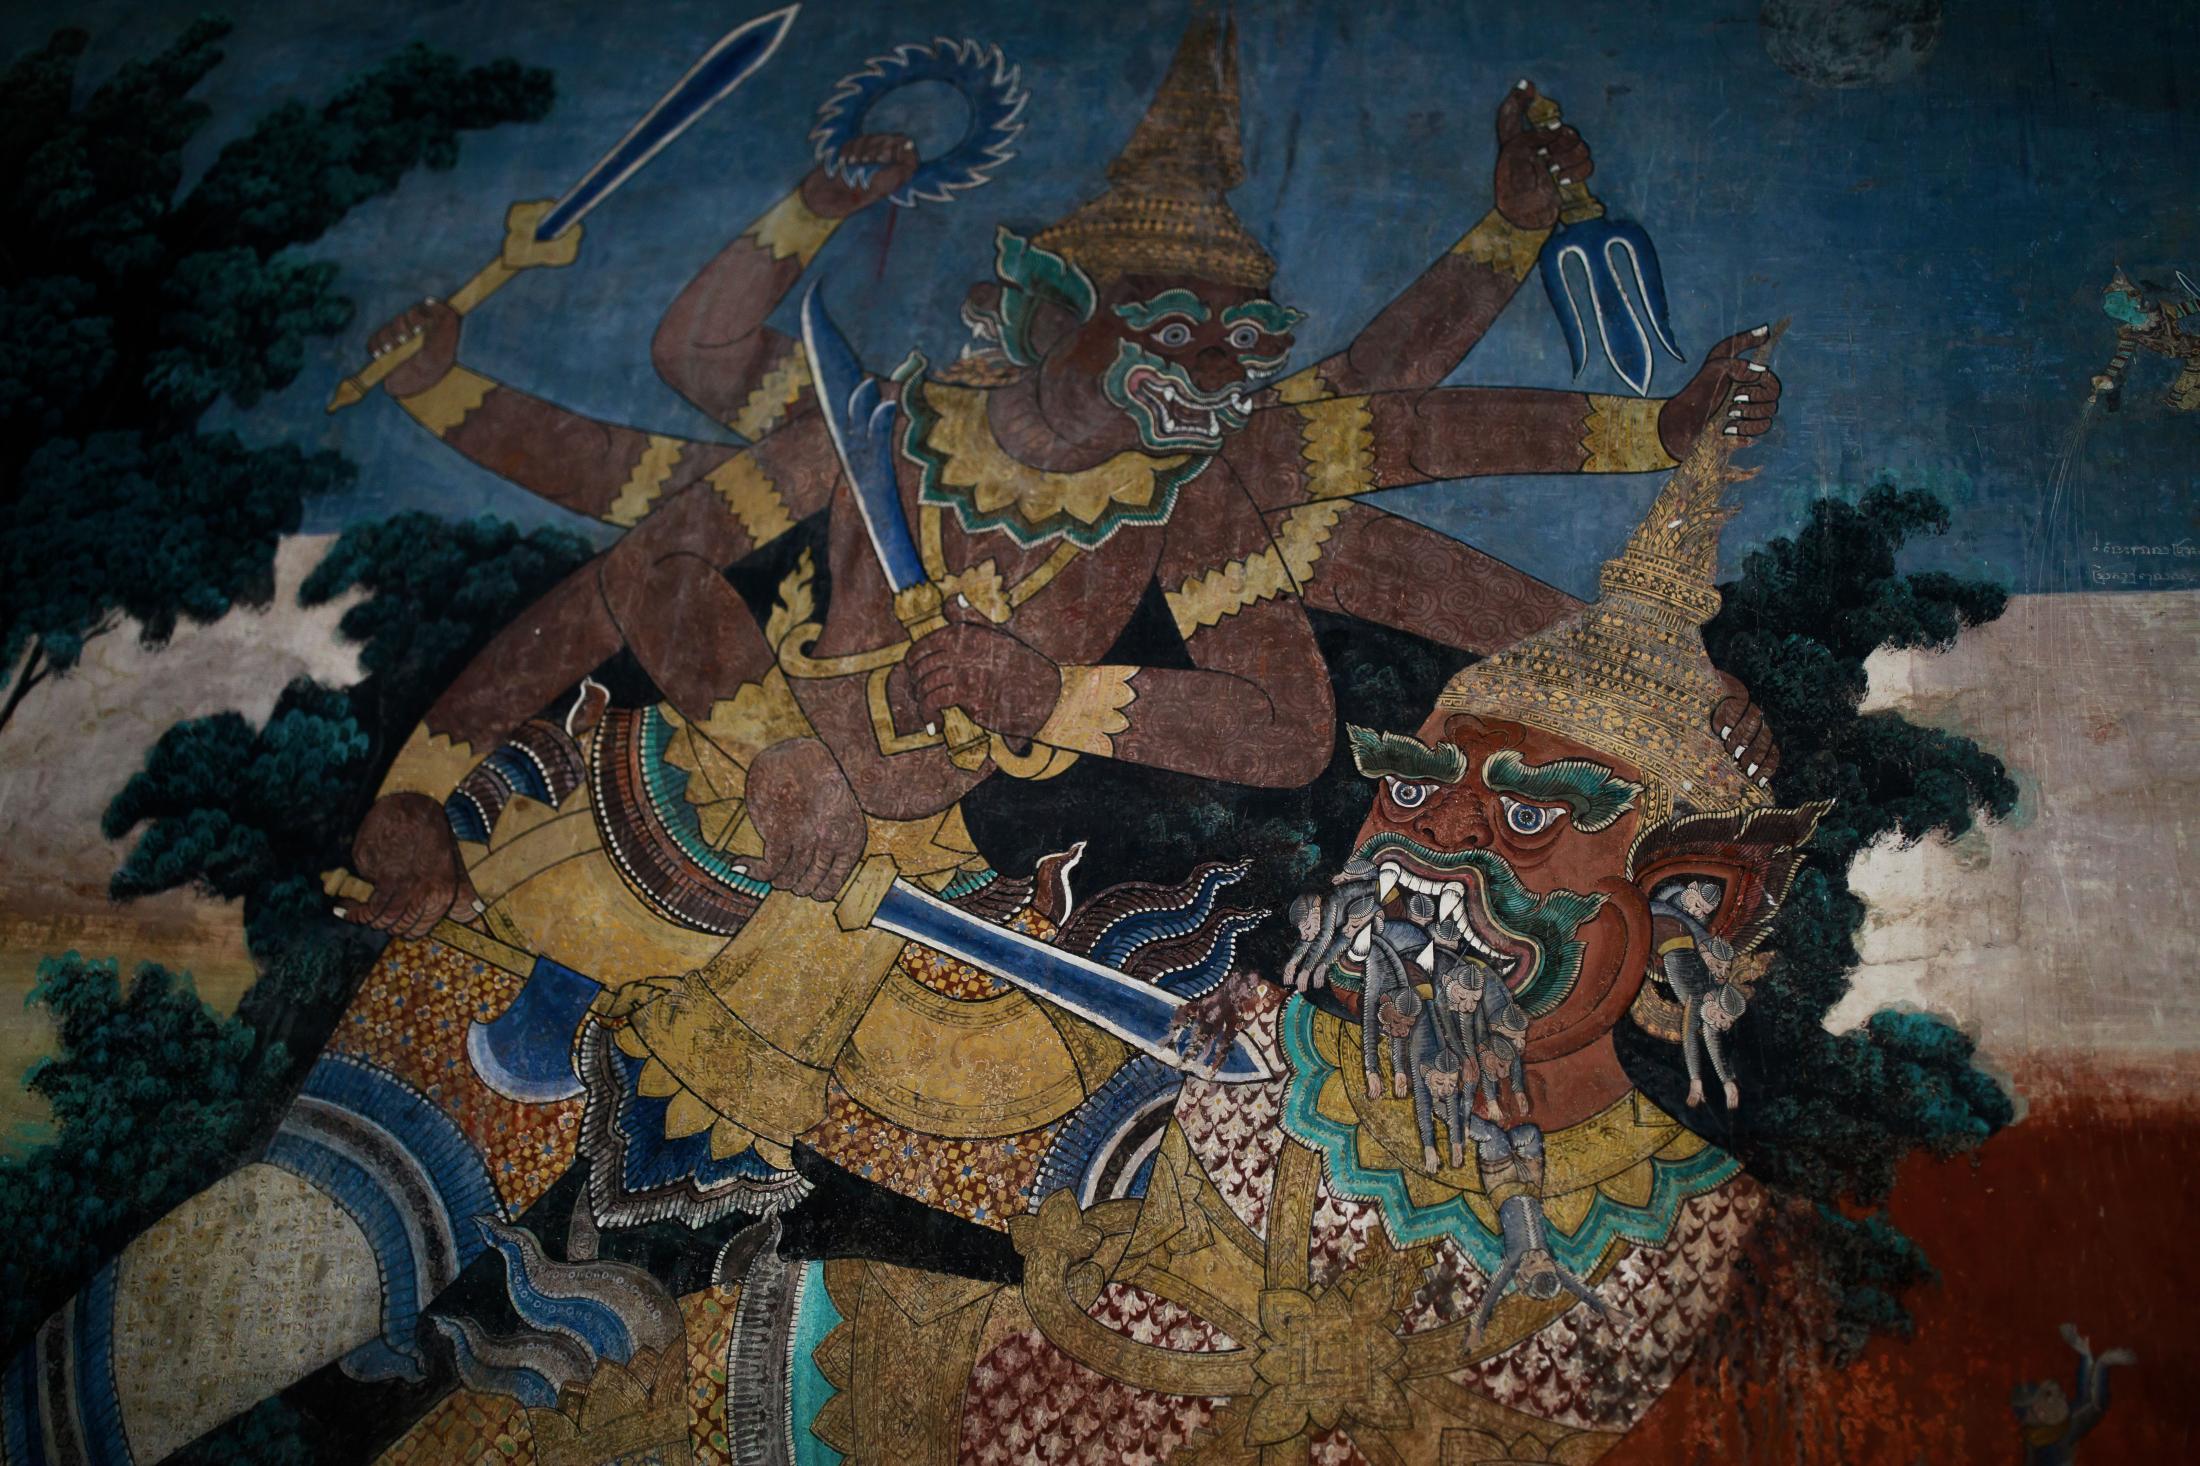  Reamker mural at the Royal Palace in Phnom Penh. This mural depicts different scenes from the...